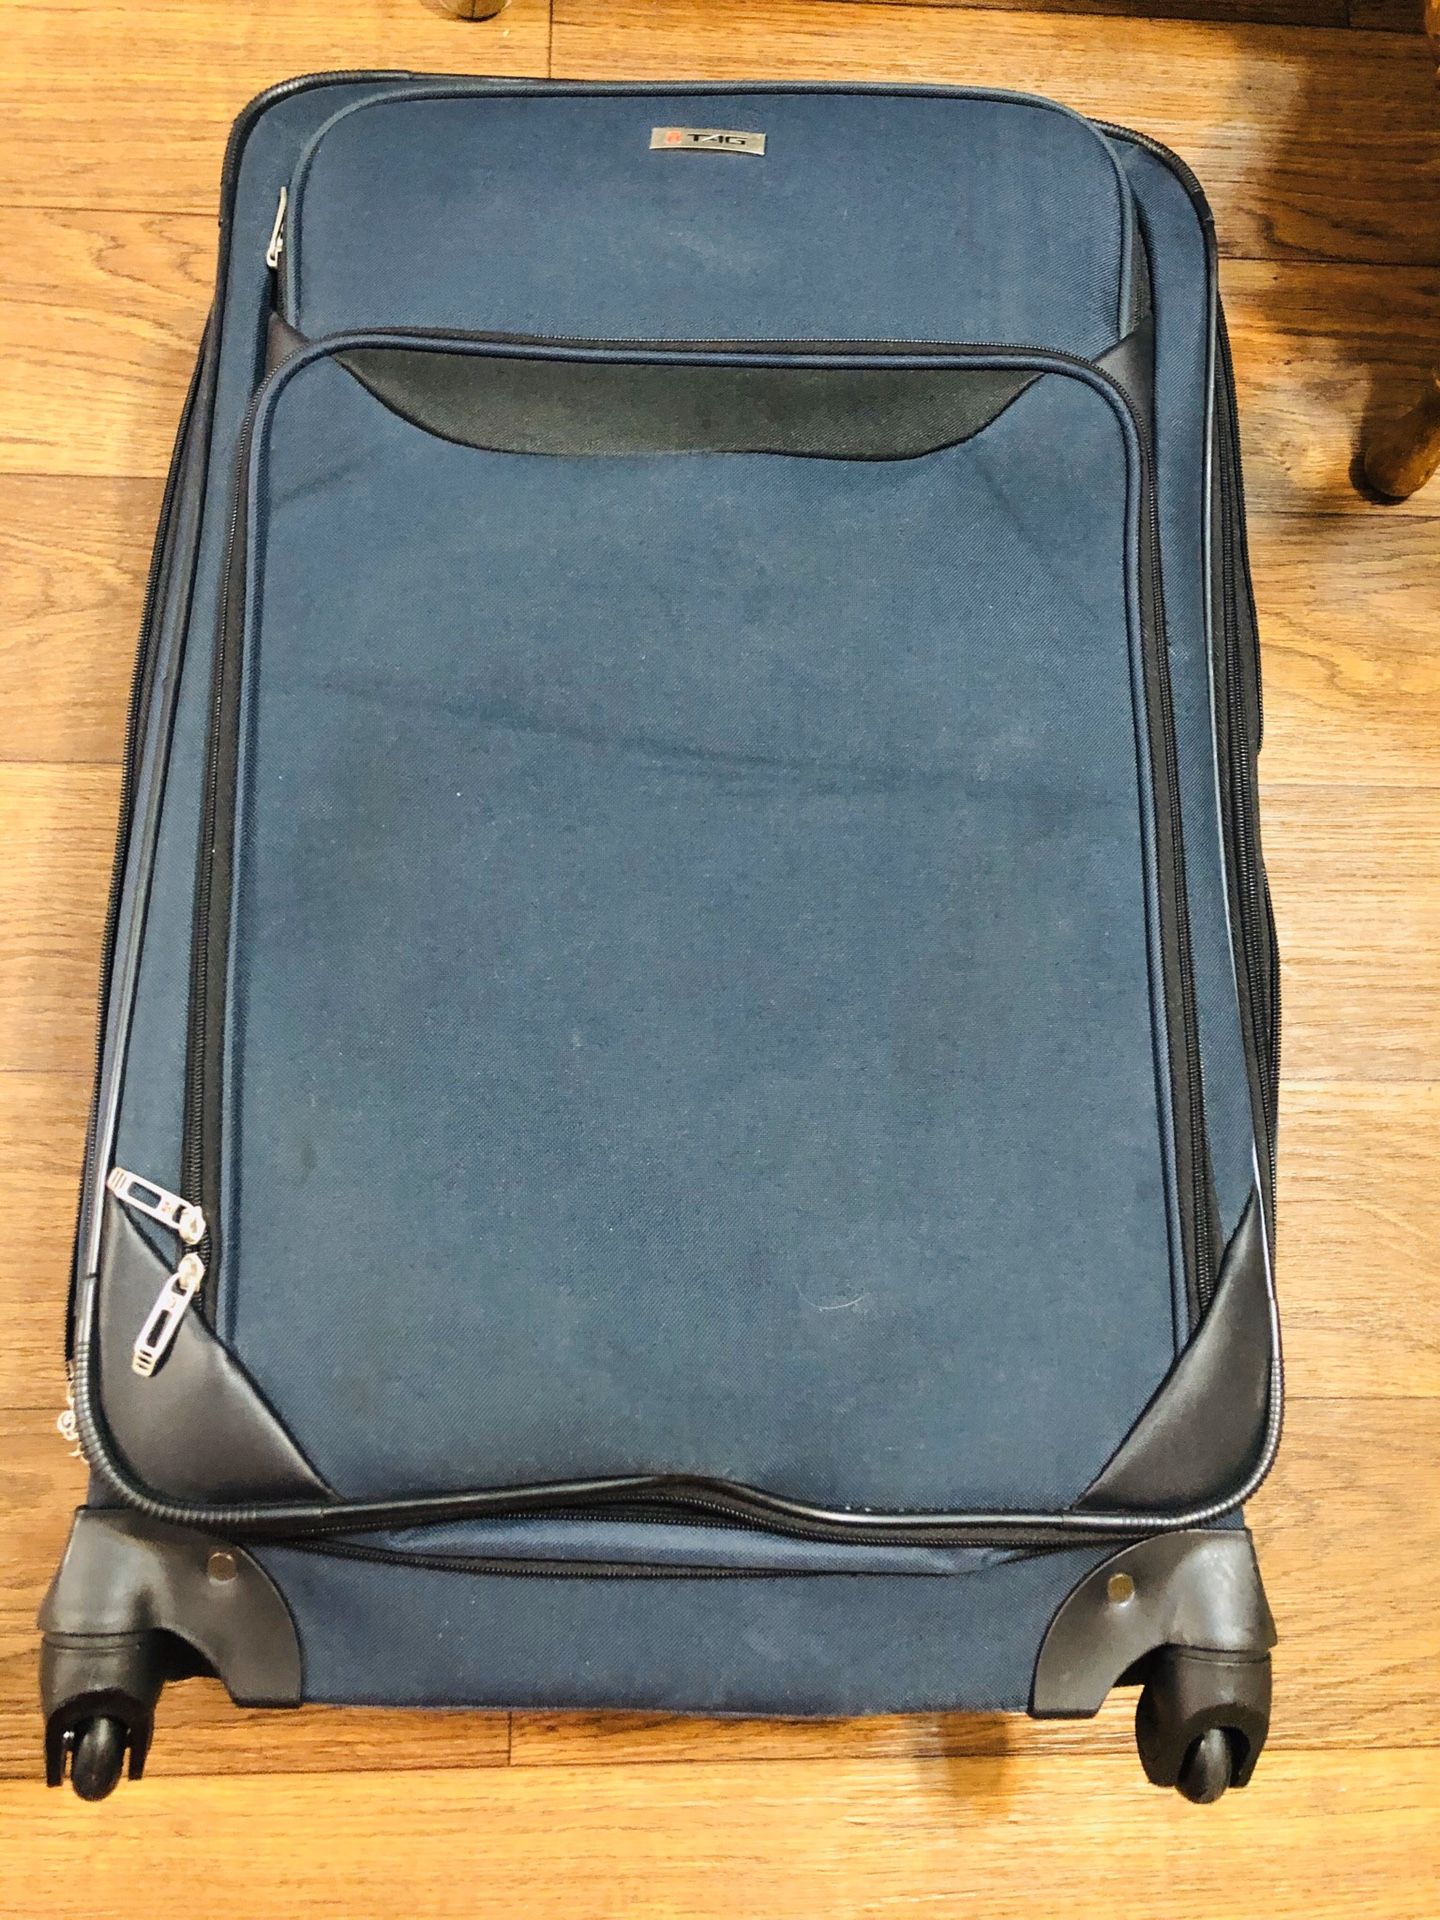 Travel trolley holds up to 50 lbs